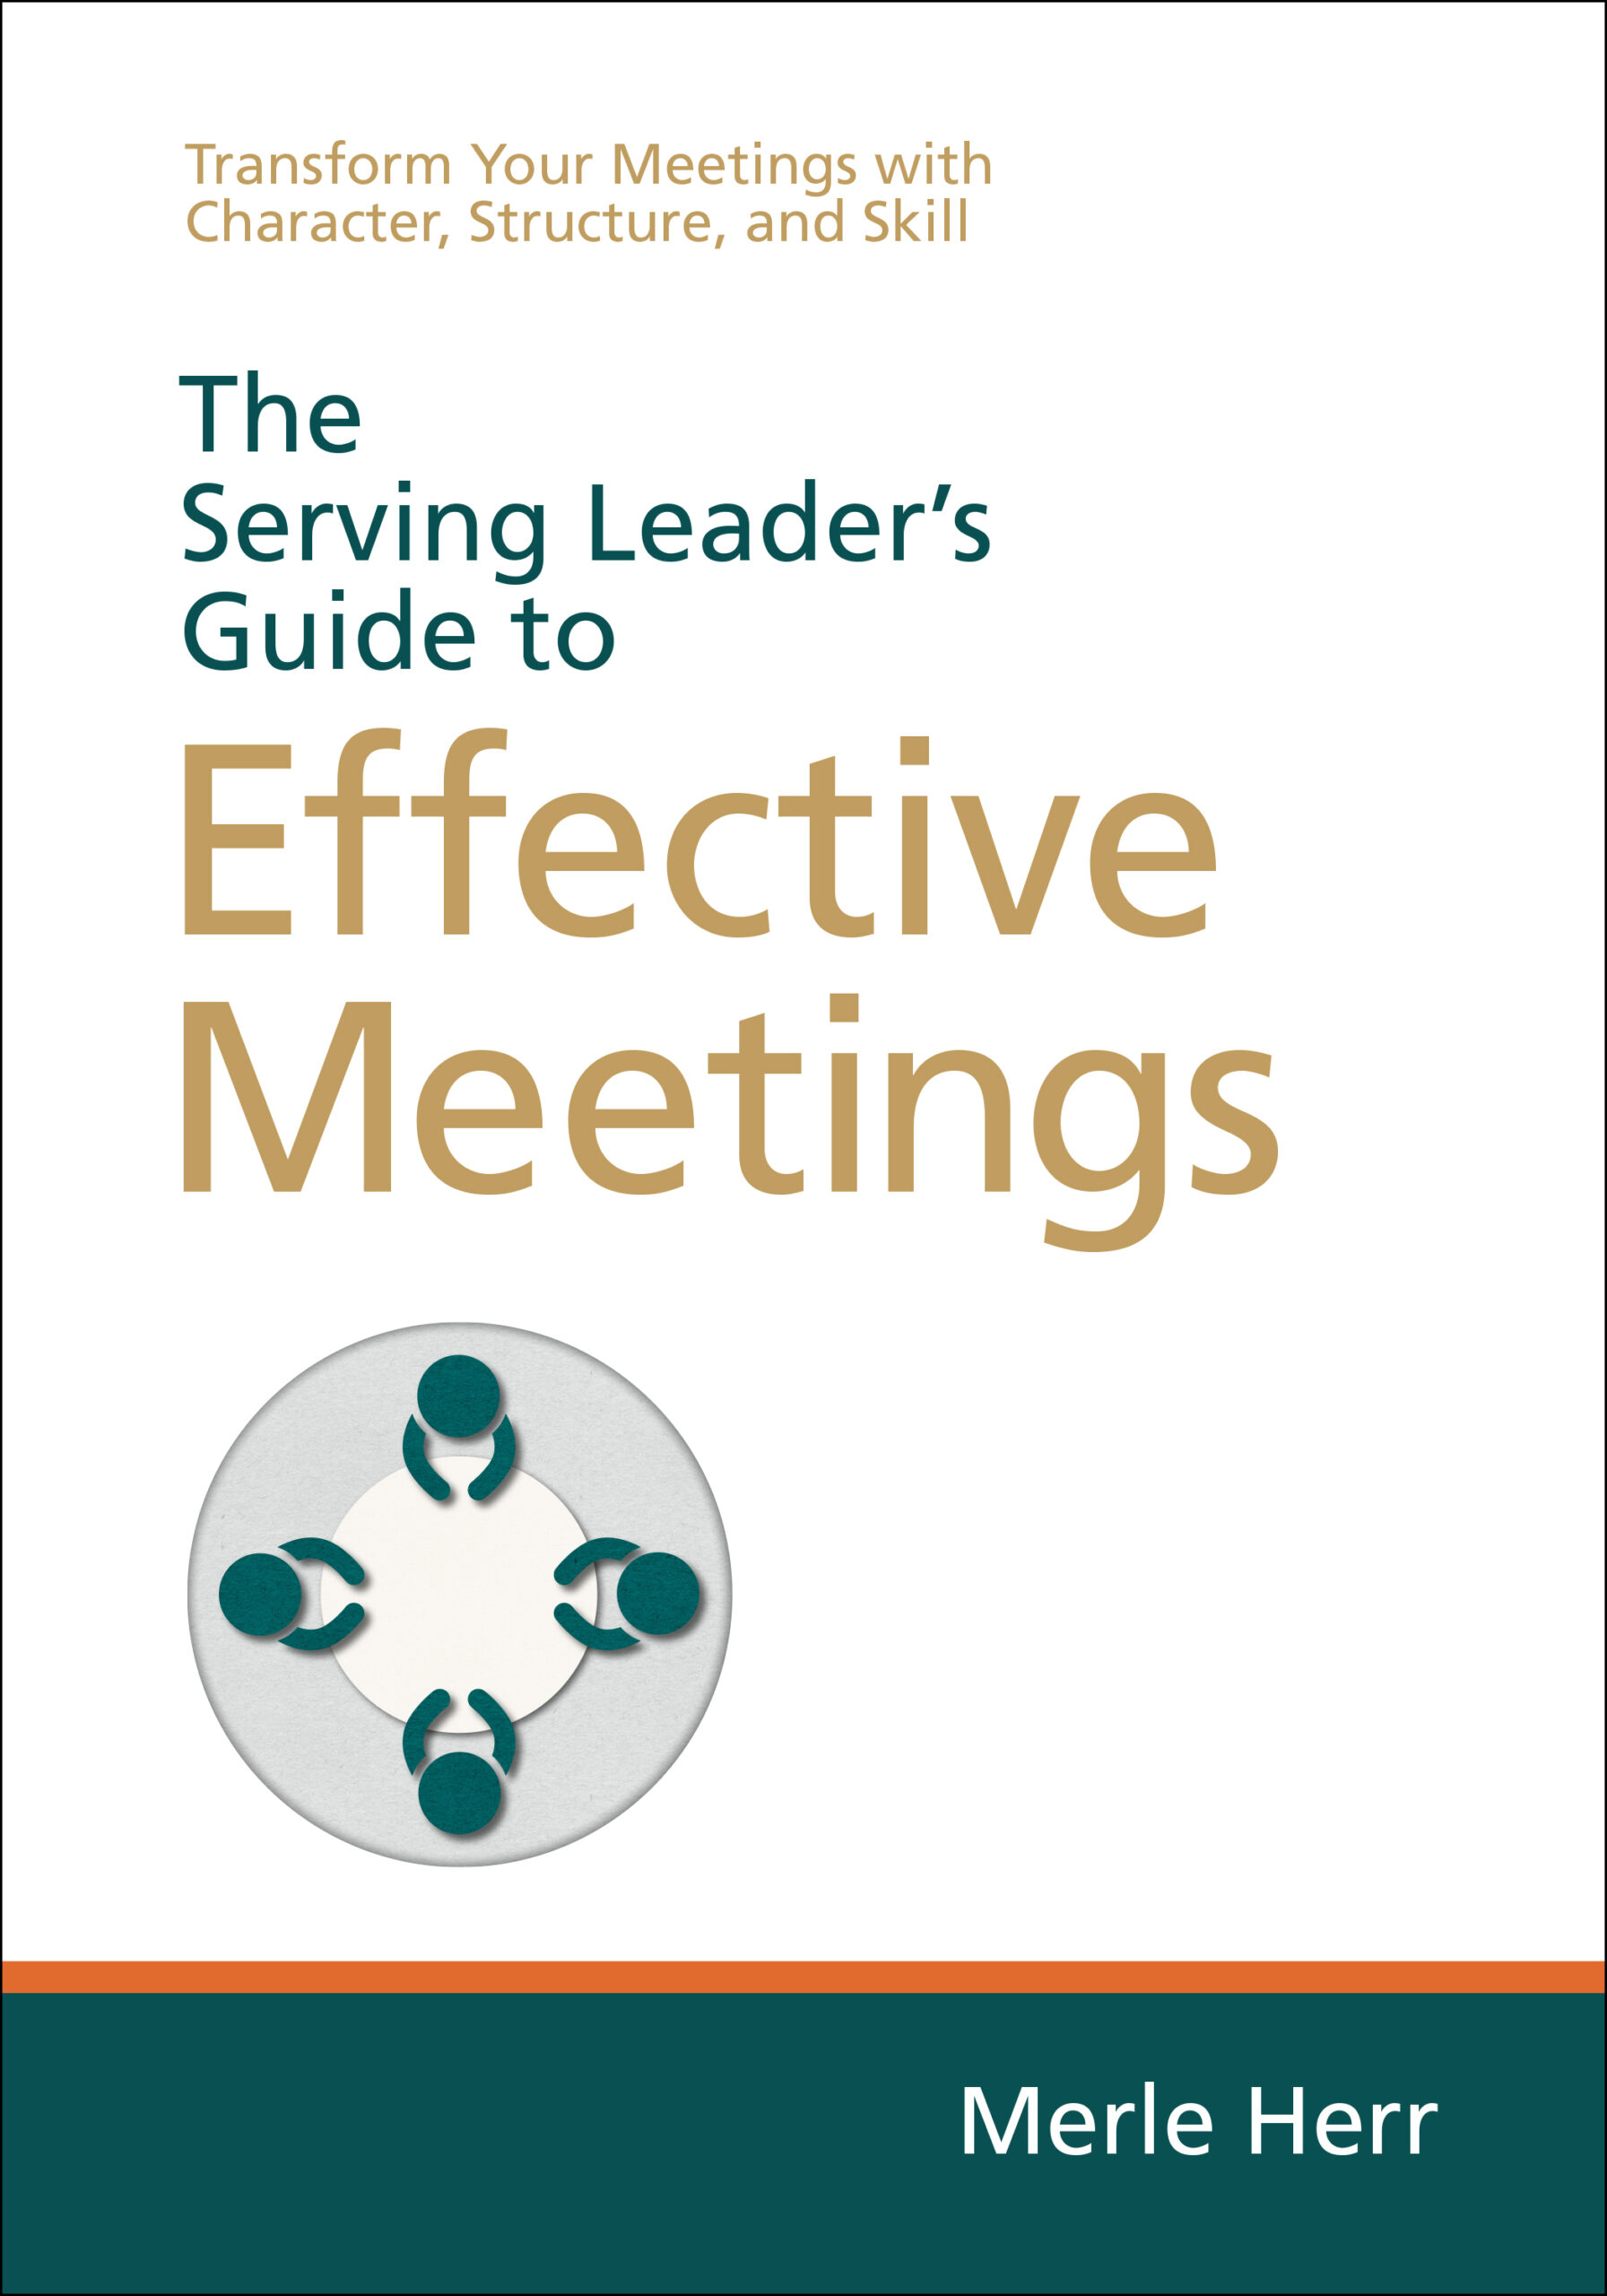 The Serving Leader’s Guide to Effective Meetings e-Book